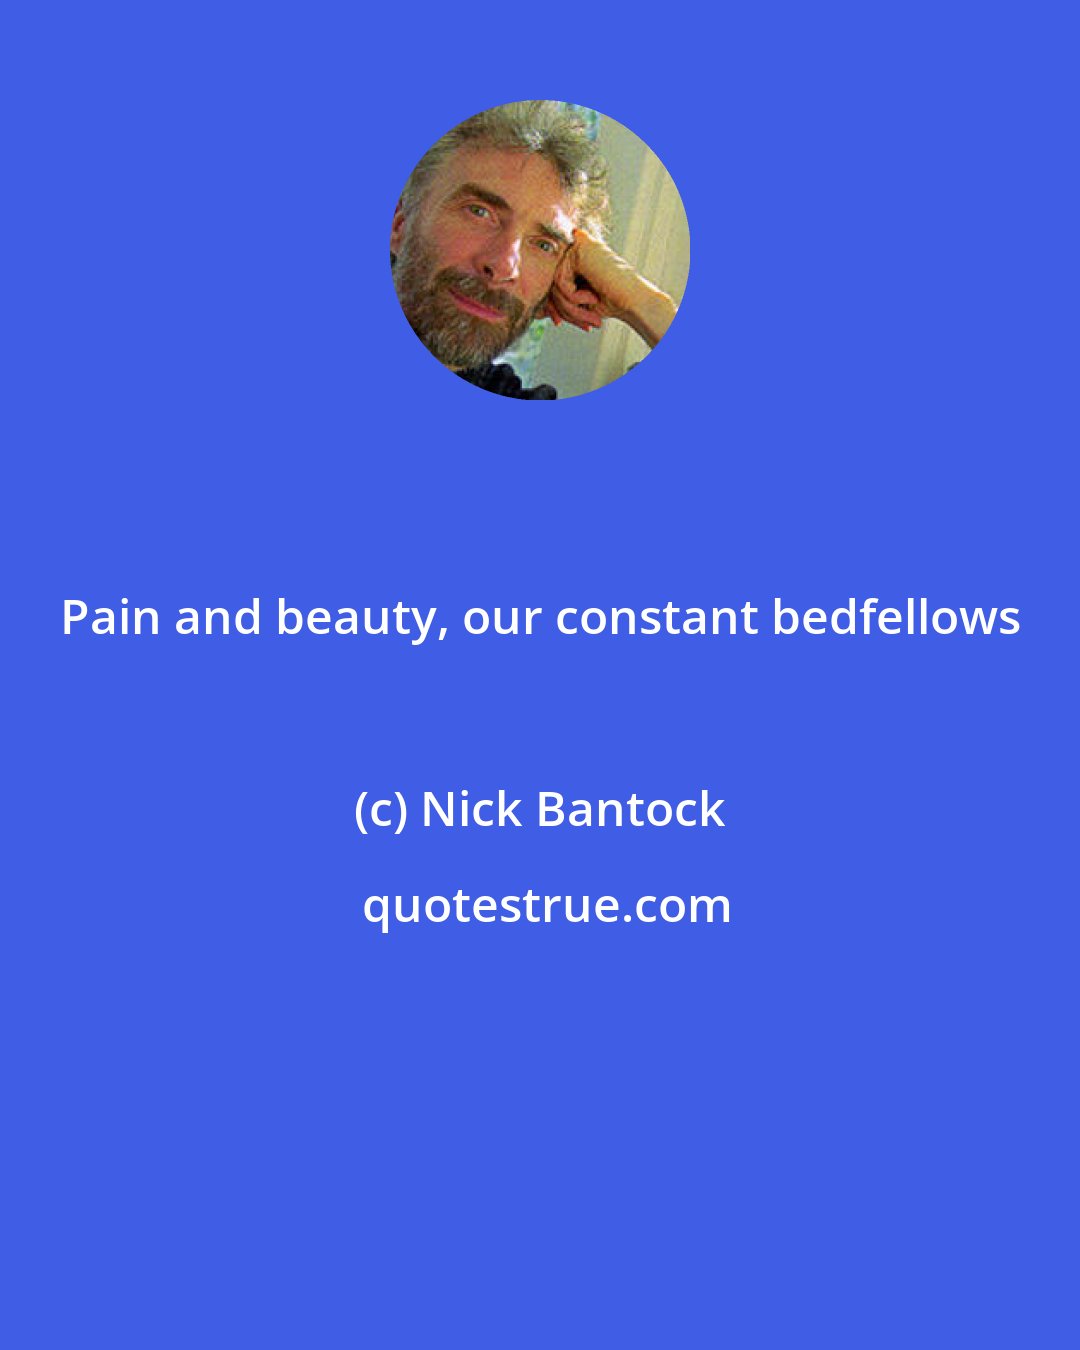 Nick Bantock: Pain and beauty, our constant bedfellows